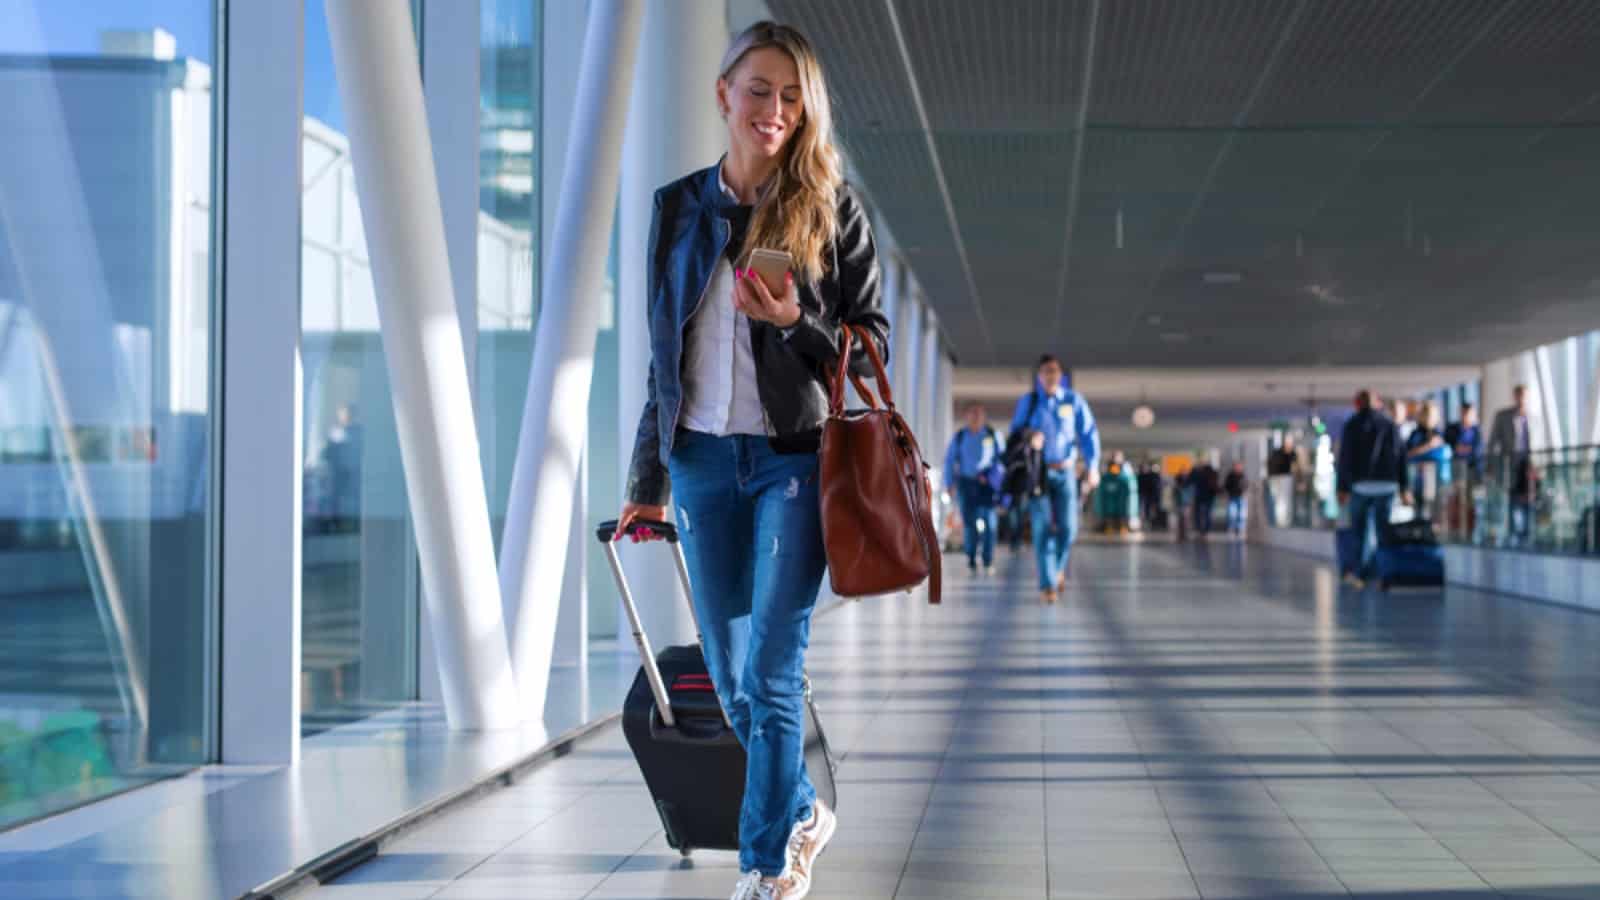 Woman holding suitcase and walking in airport